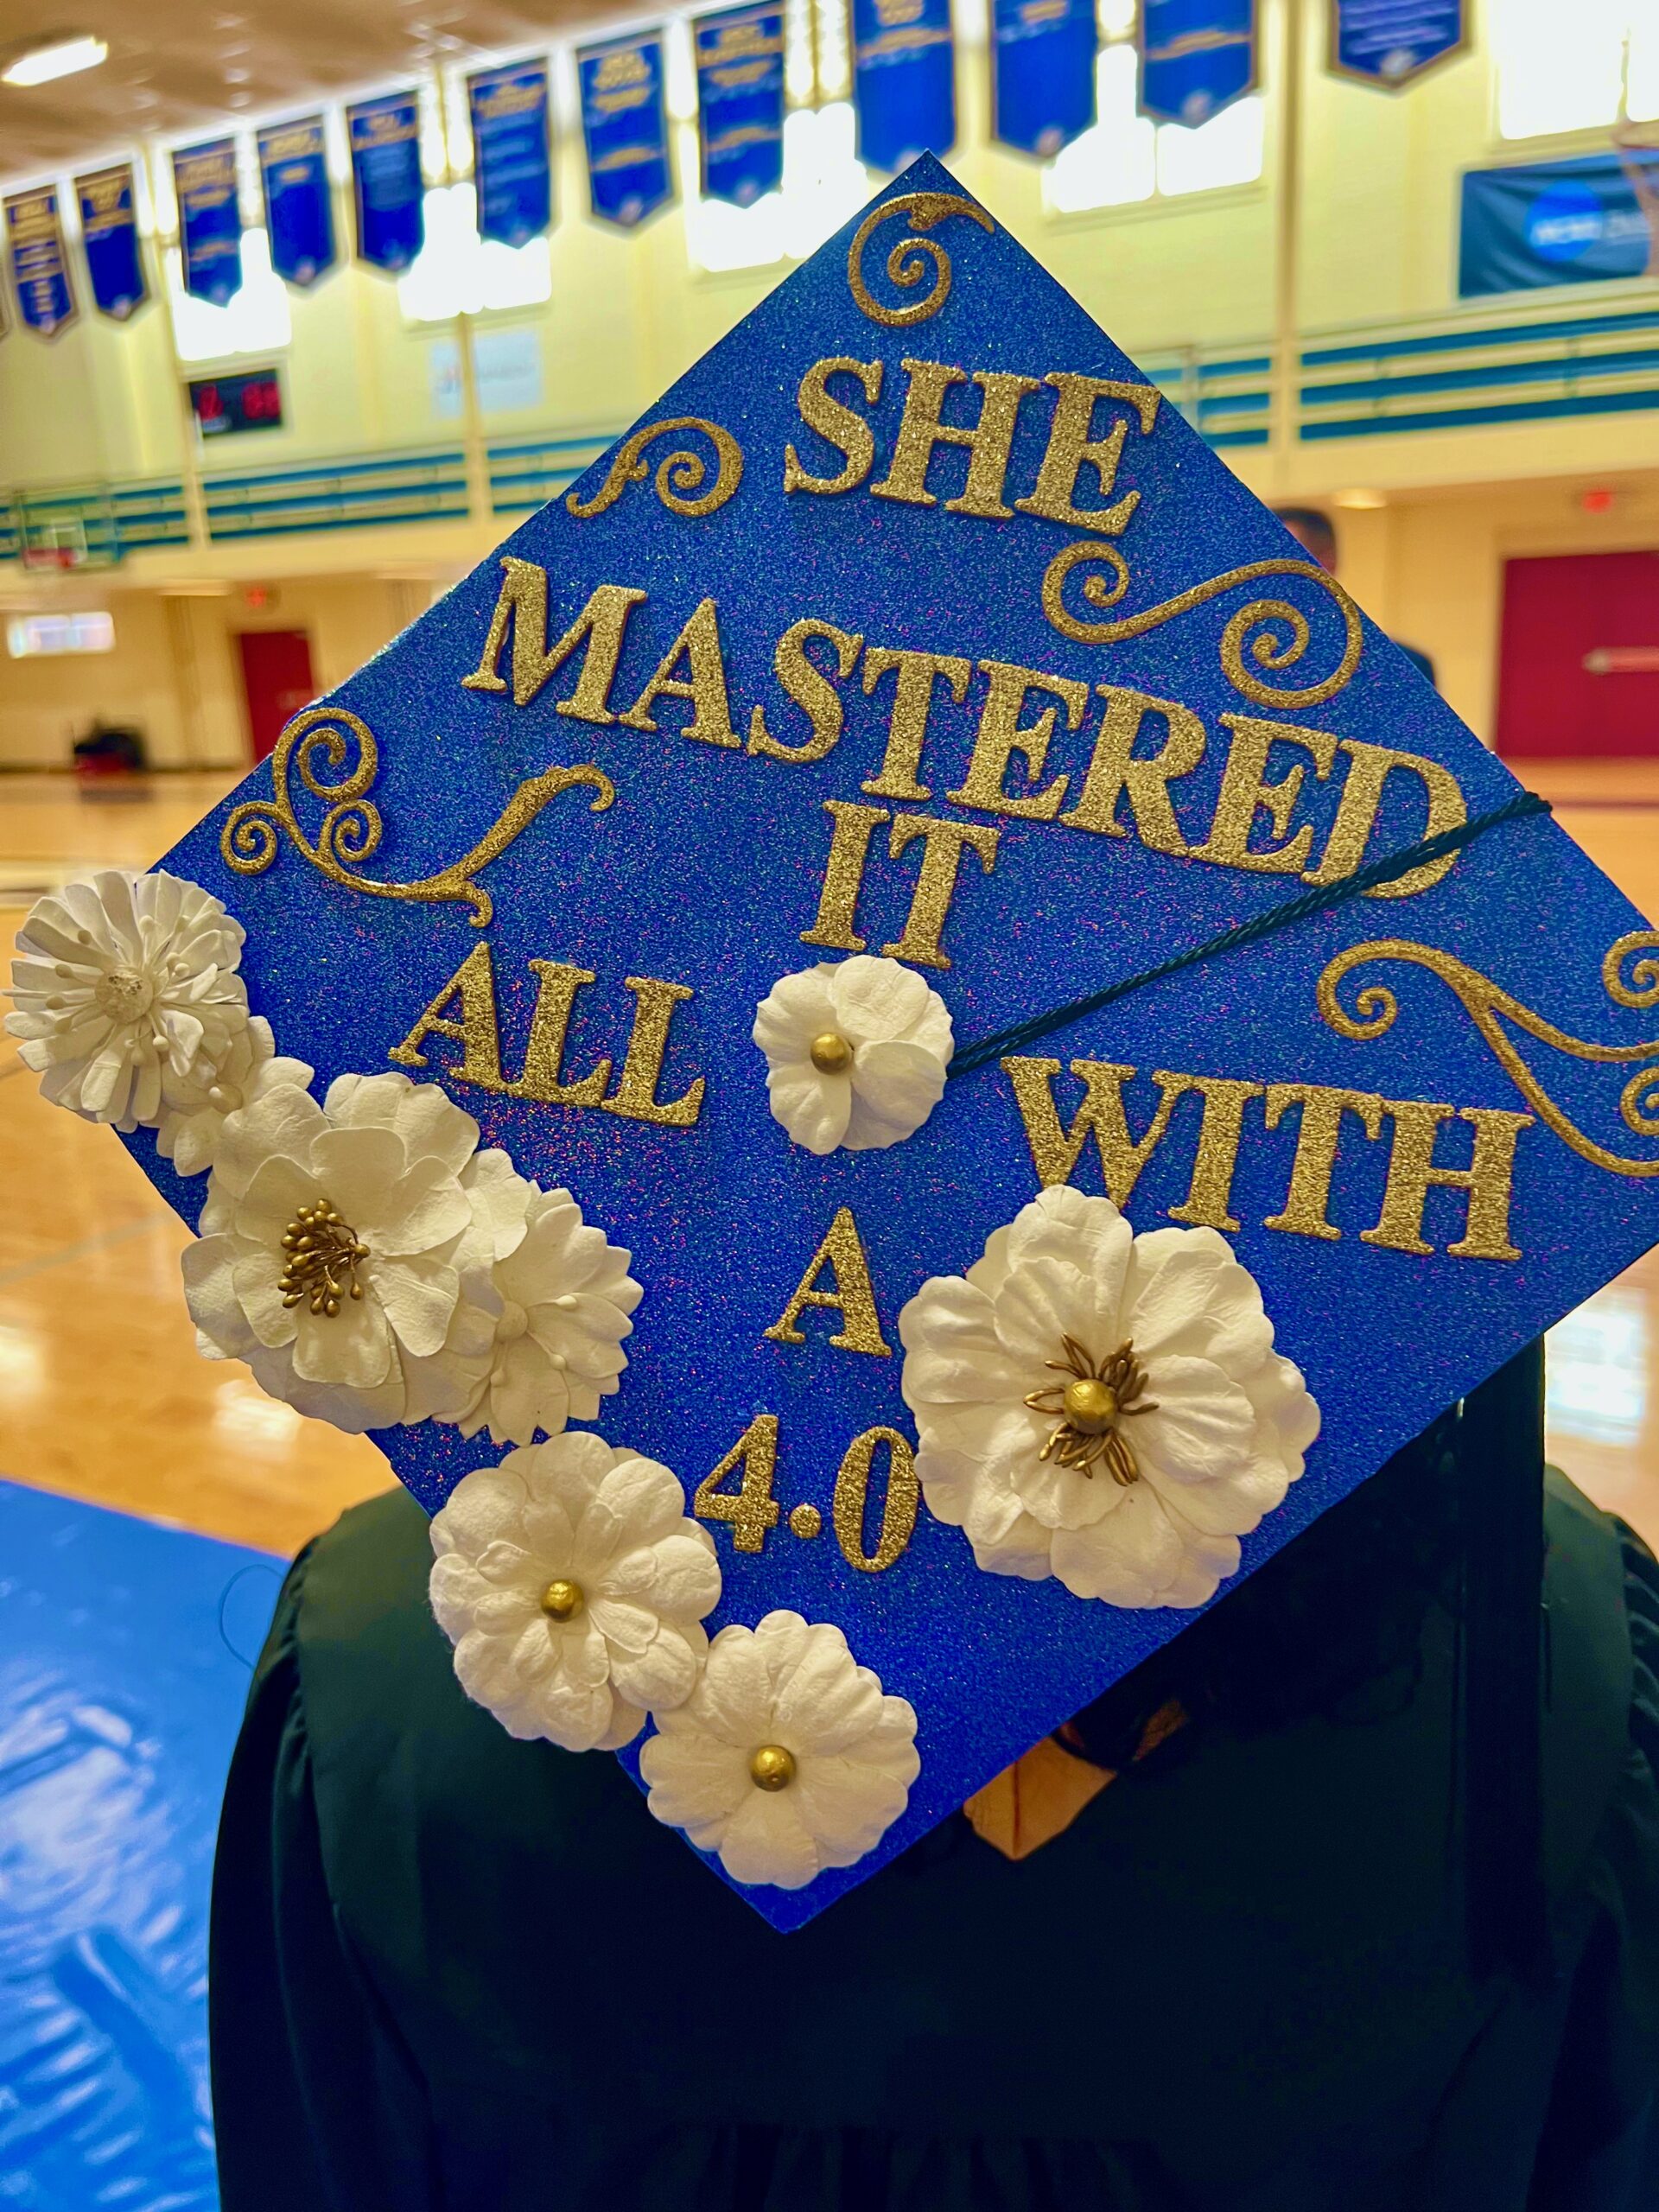 Decorated mortarboard reading "She mastered it all with a 4.0"